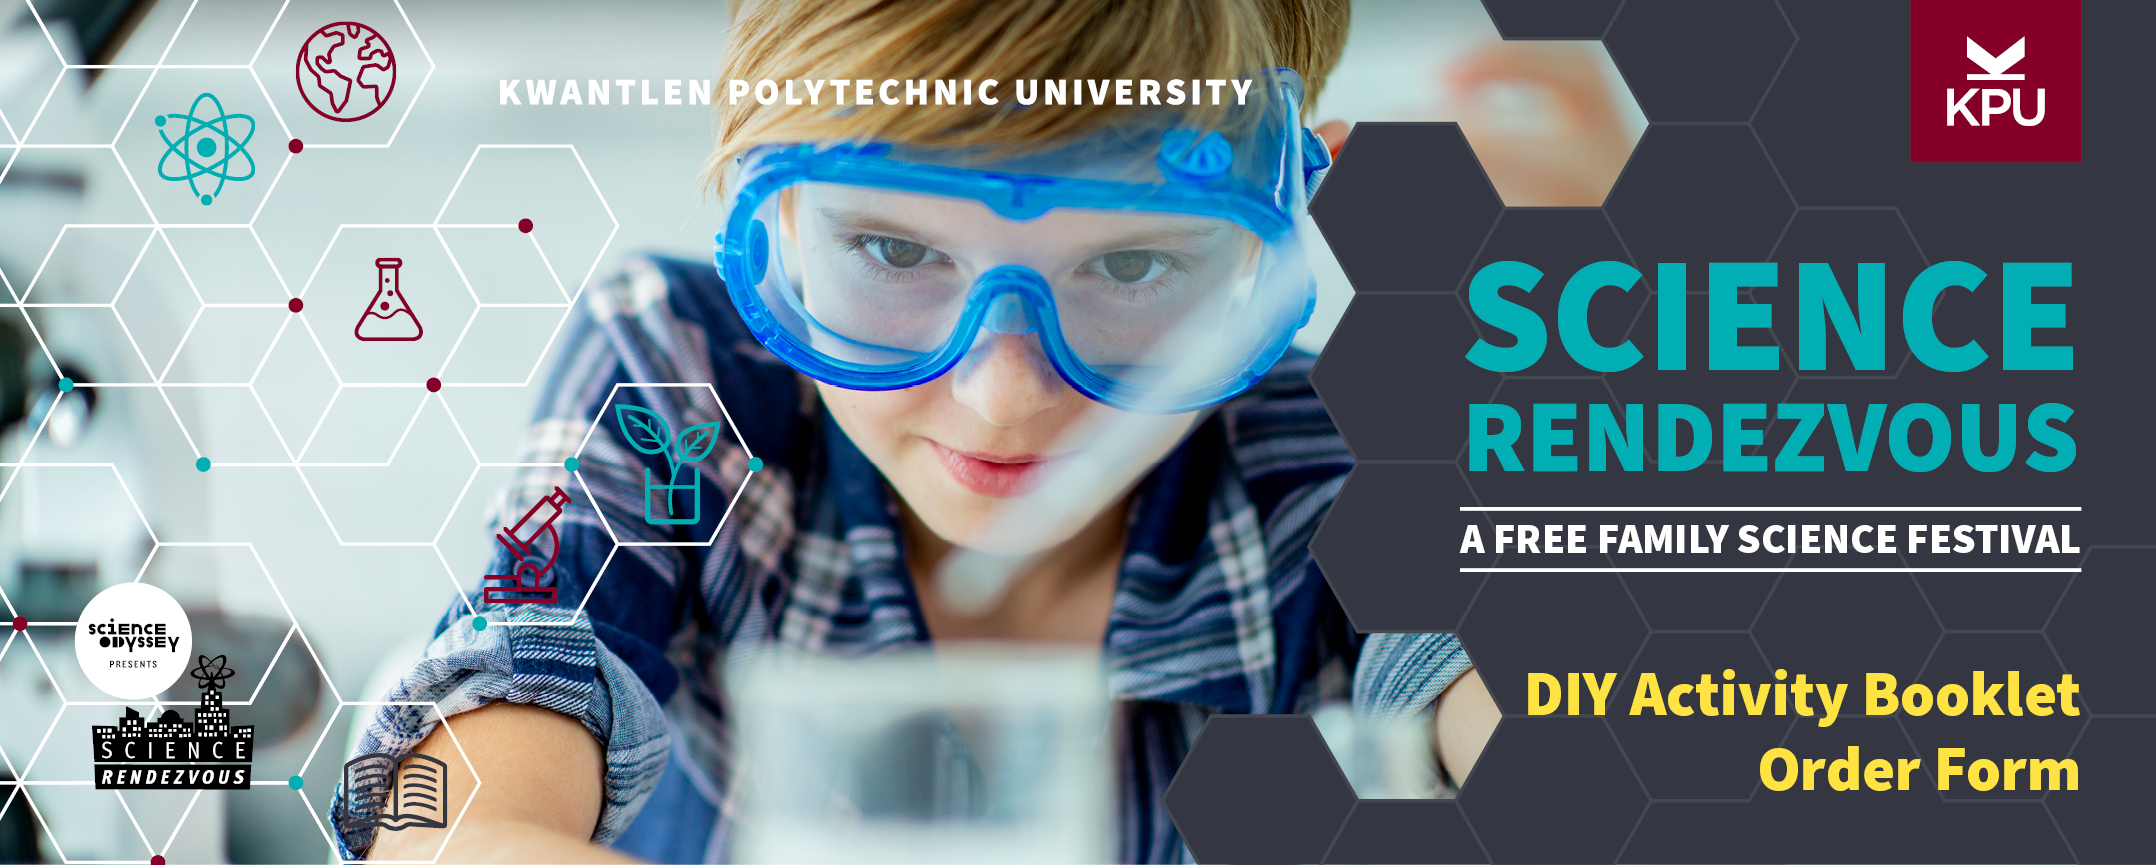 KPU Science Rendezvous 2023, Langley, Science Odyssey, Science Rendezvous, science activities, festival, free family event